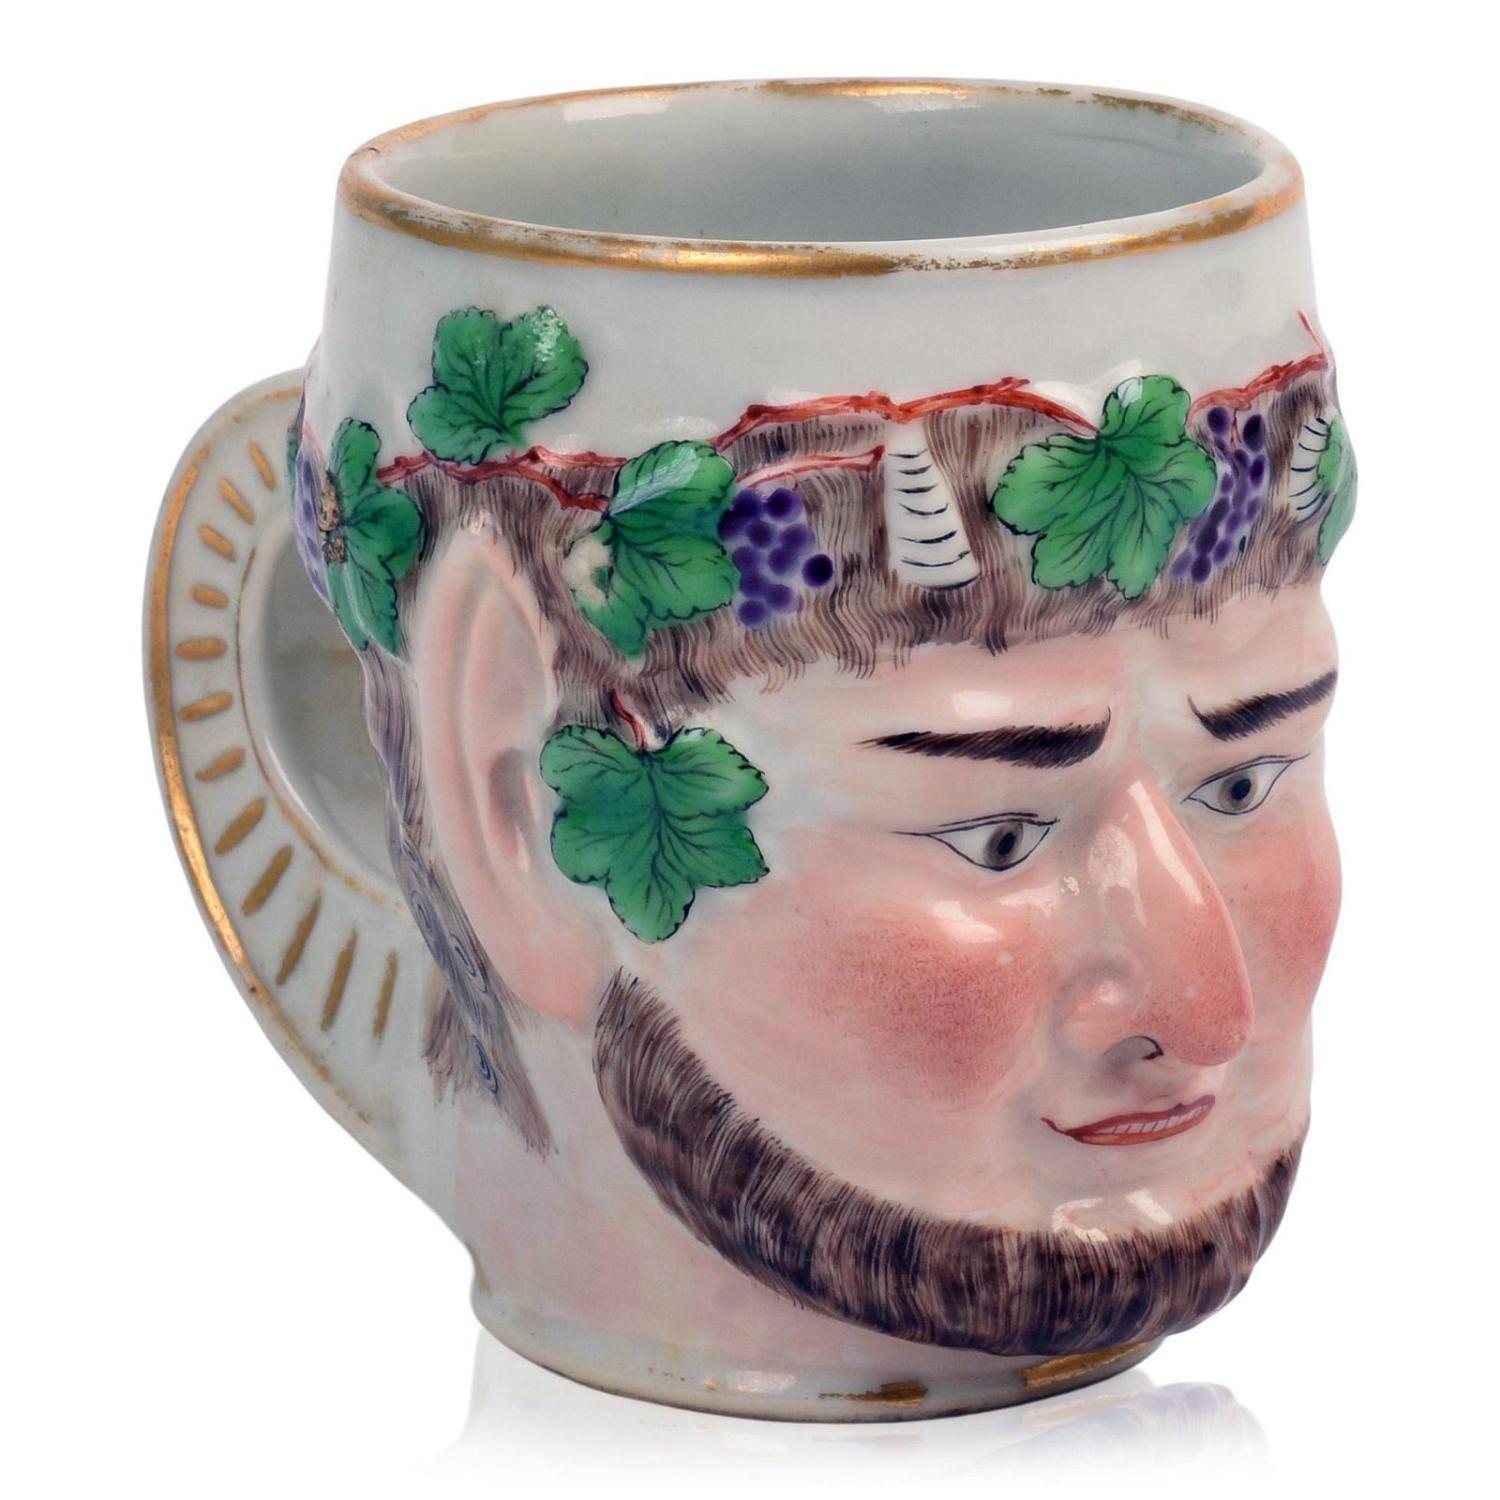 Chinese Export Porcelain Bacchus Mug After Derby Porcelain,
Circa 1785.

The Chinese Export porcelain mug is modeled after a Derby porcelain original as the head of Bacchus, the face naturalistically & delicately enameled.  The eyebrows, beard and